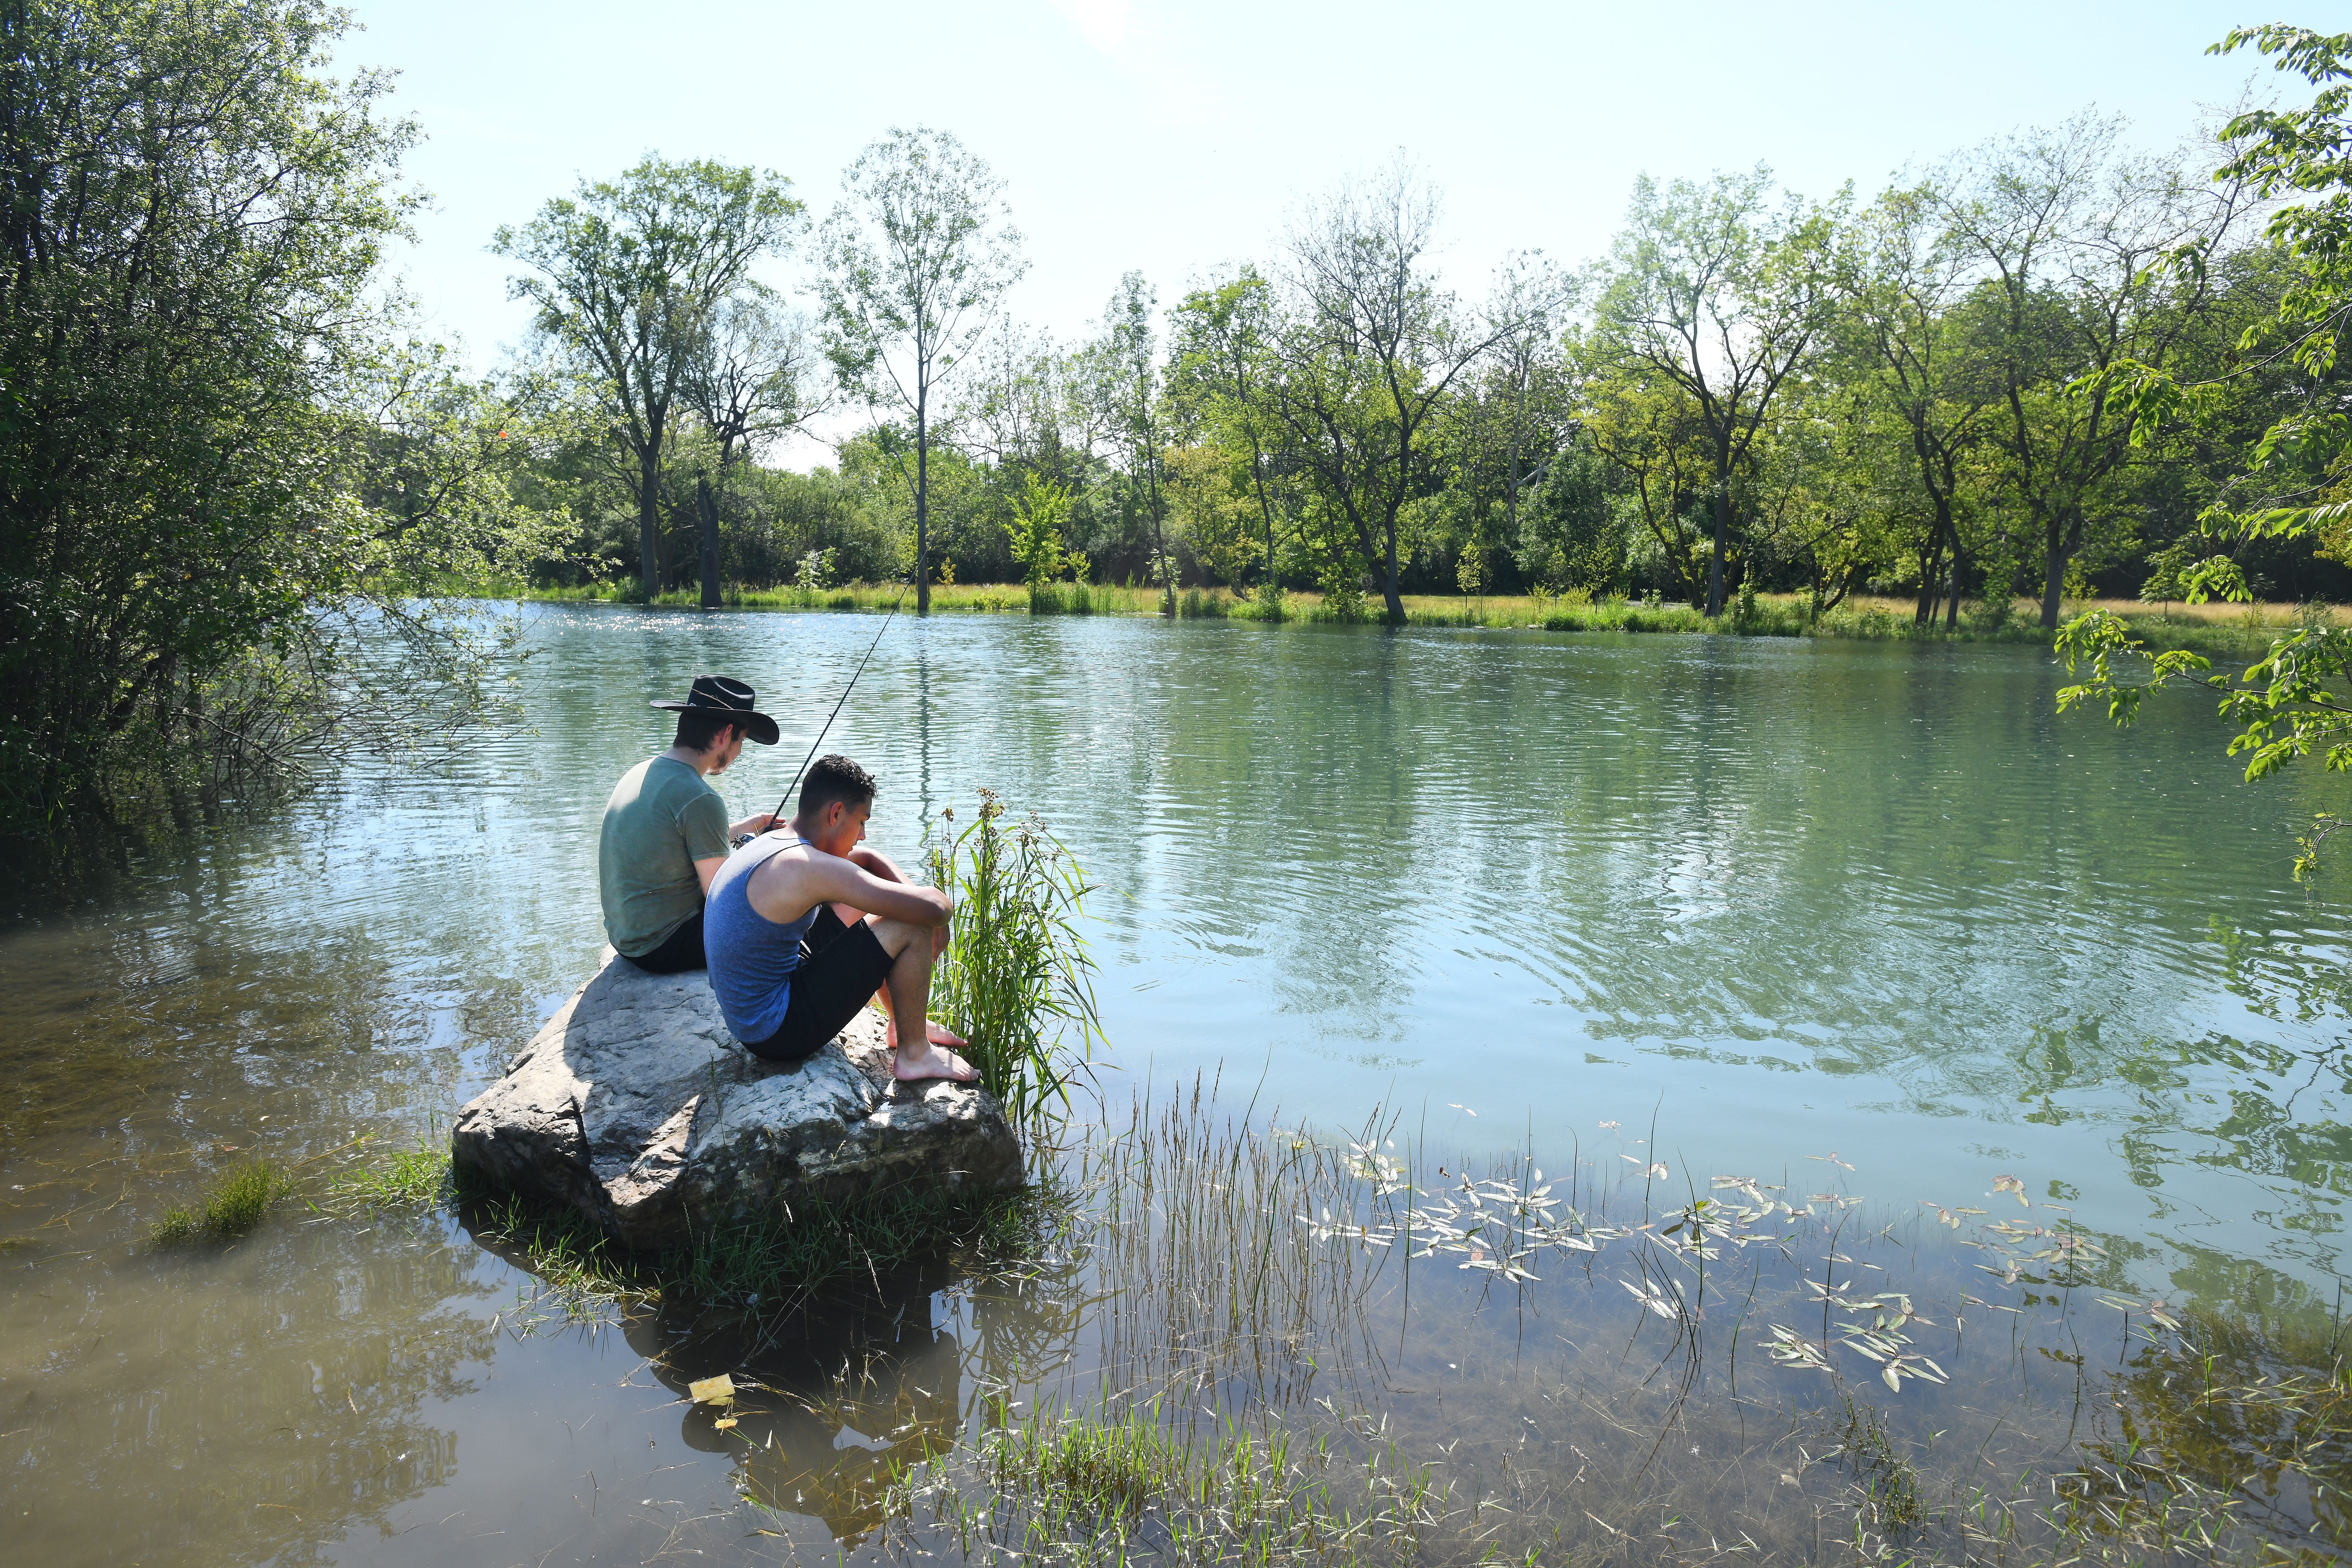 Michael Truesdell and Nathaniel Cecil of Lincoln Park fish from a rock surrounded by water near the usual bank of the Trenton Channel in Elizabeth Park in Trenton, Michigan on July 1, 2019.